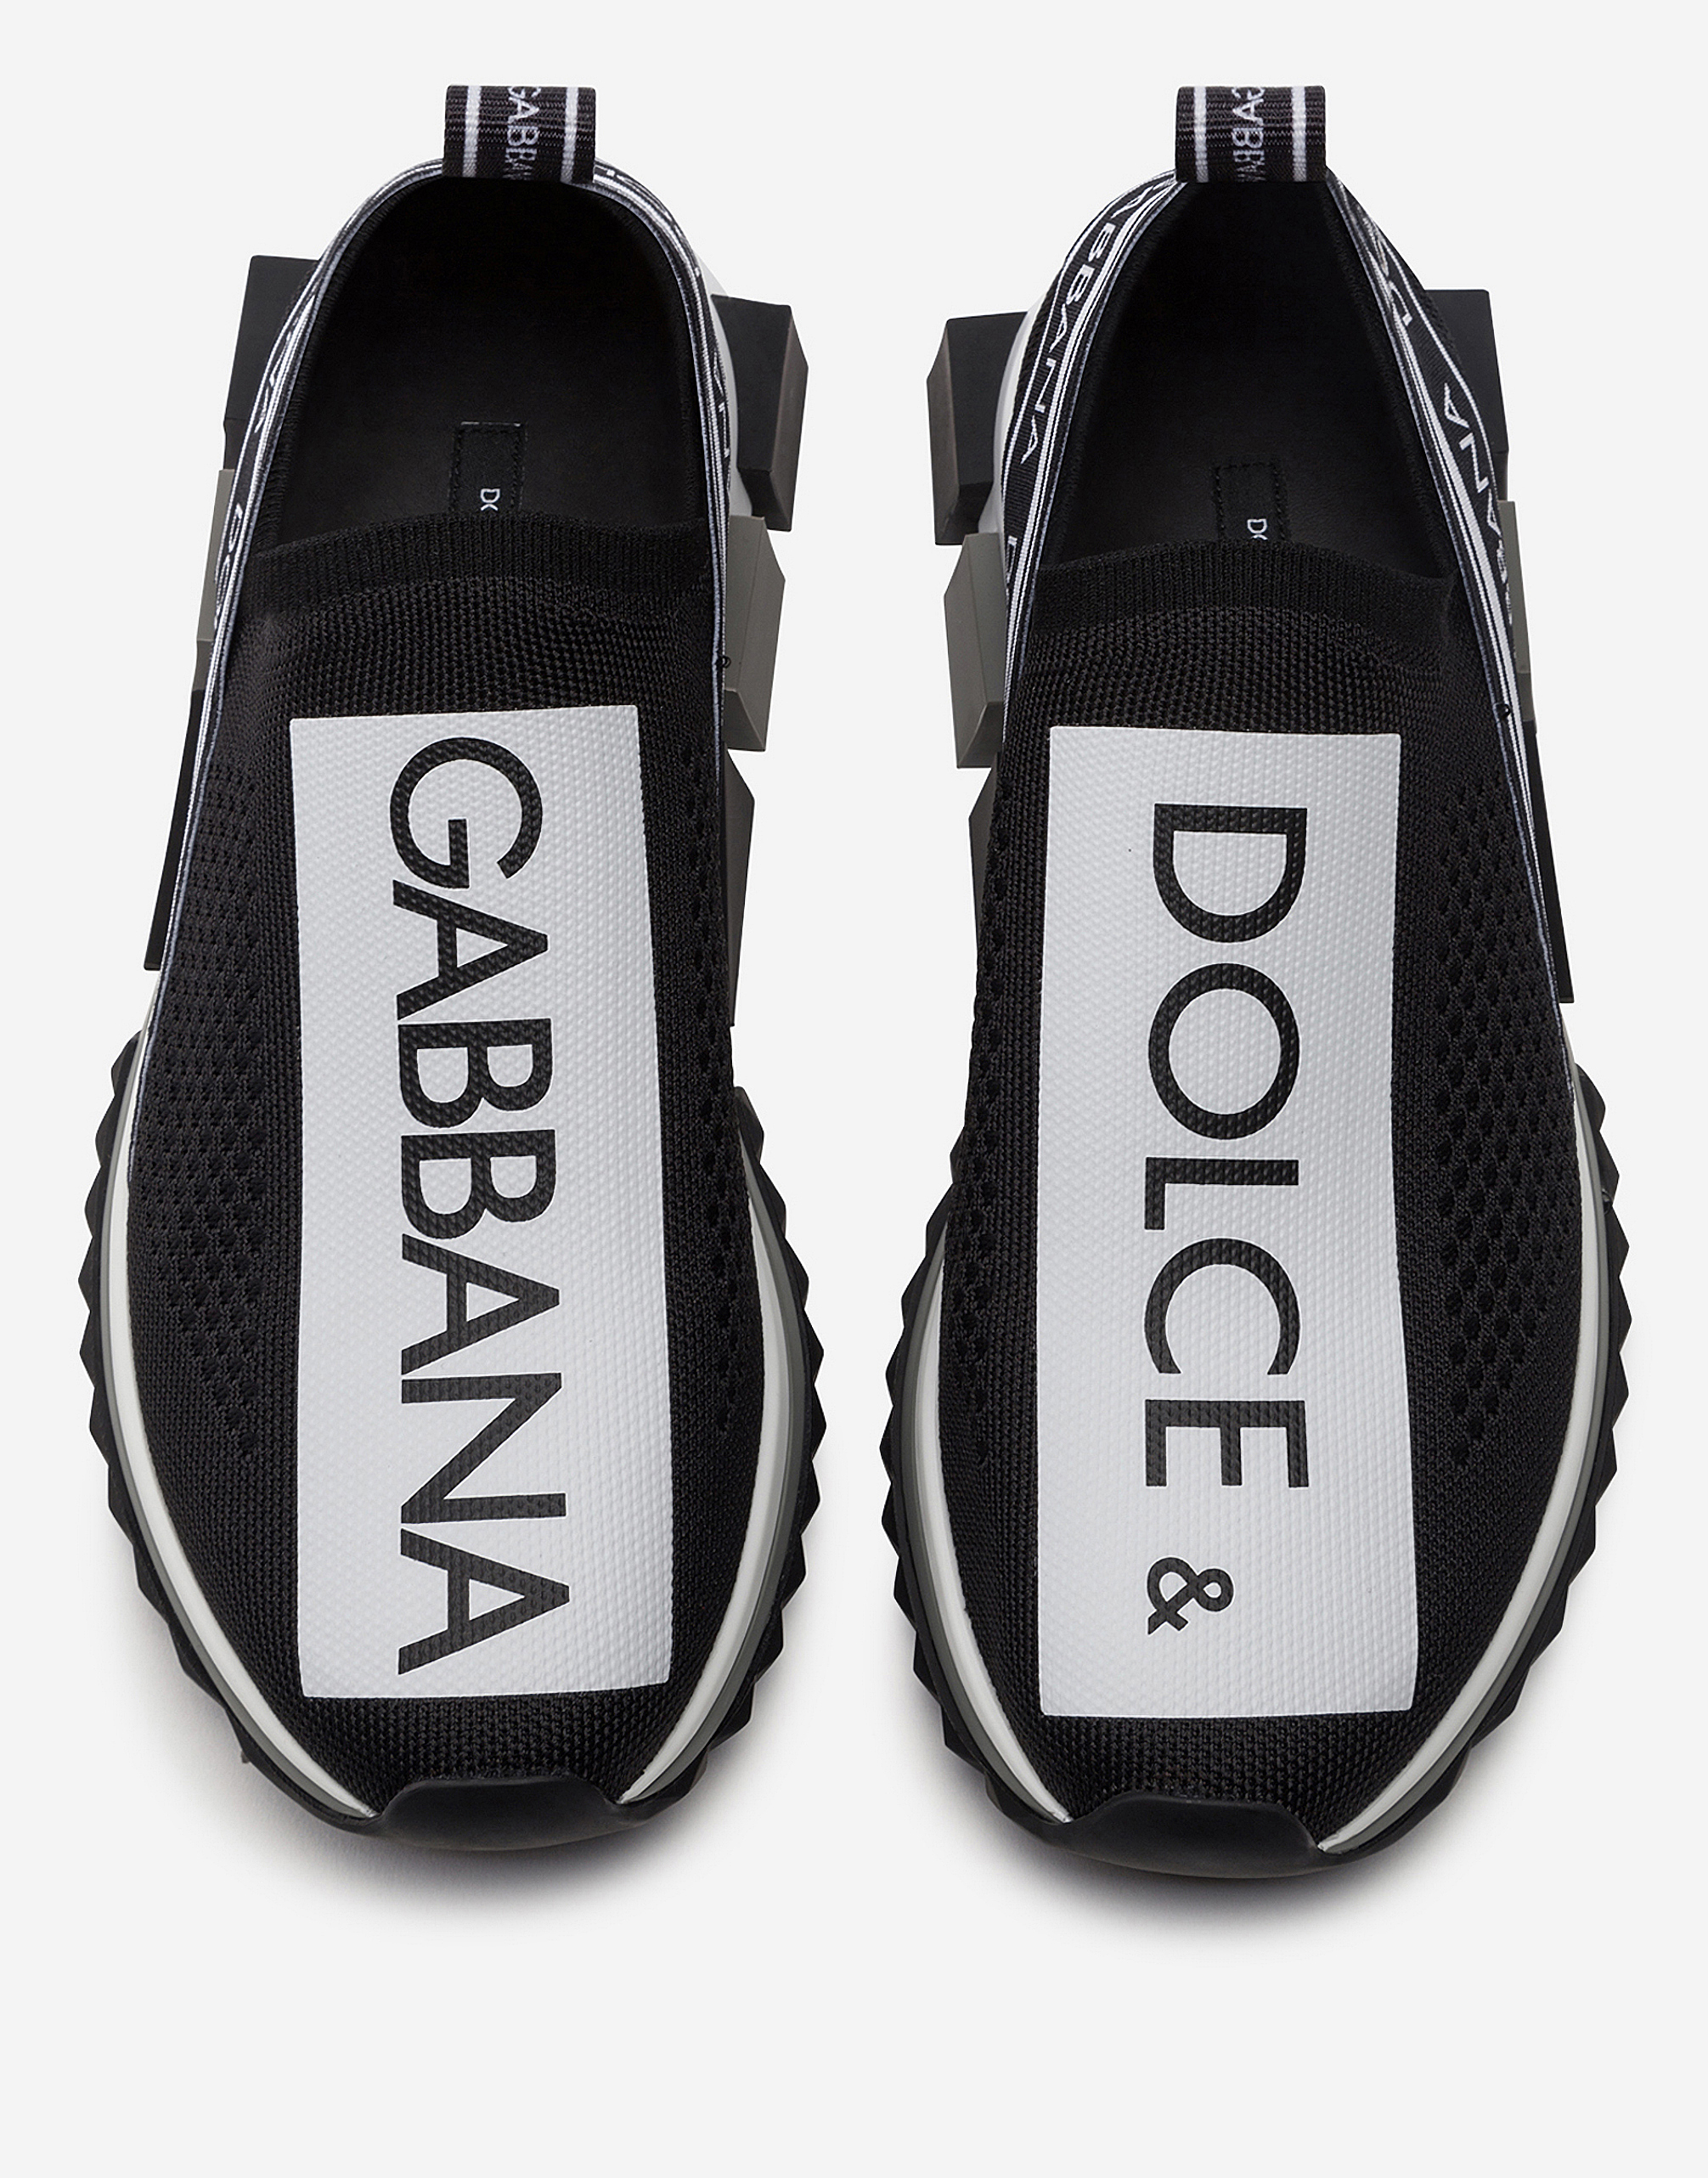 dolce and gabbana sorrento sneakers review